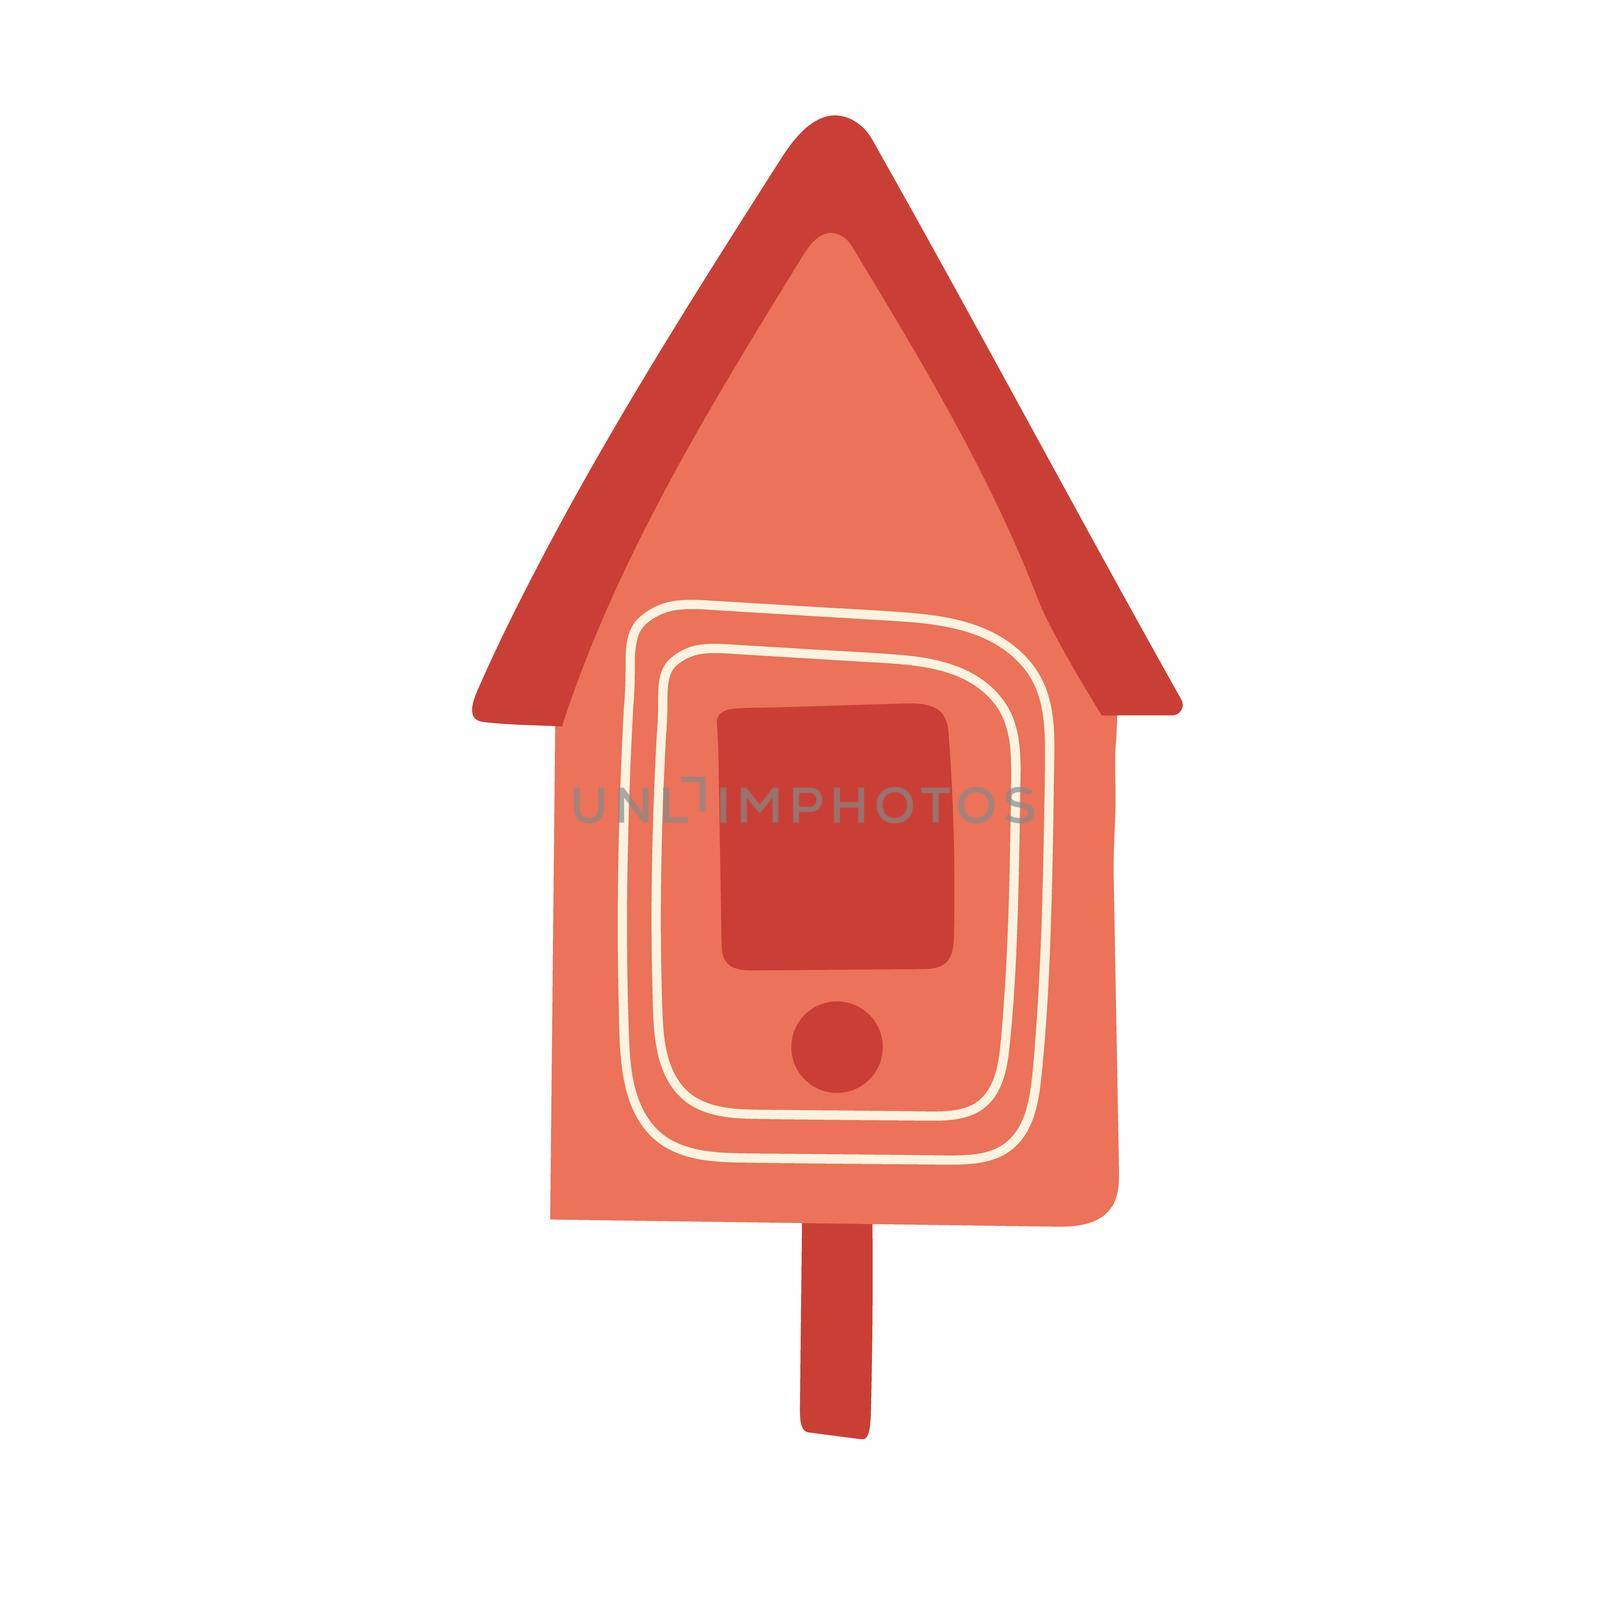 Wooden birdhouse on a stick, a house for birds. Hand drawn vector illustration. Isolated element on a white background.